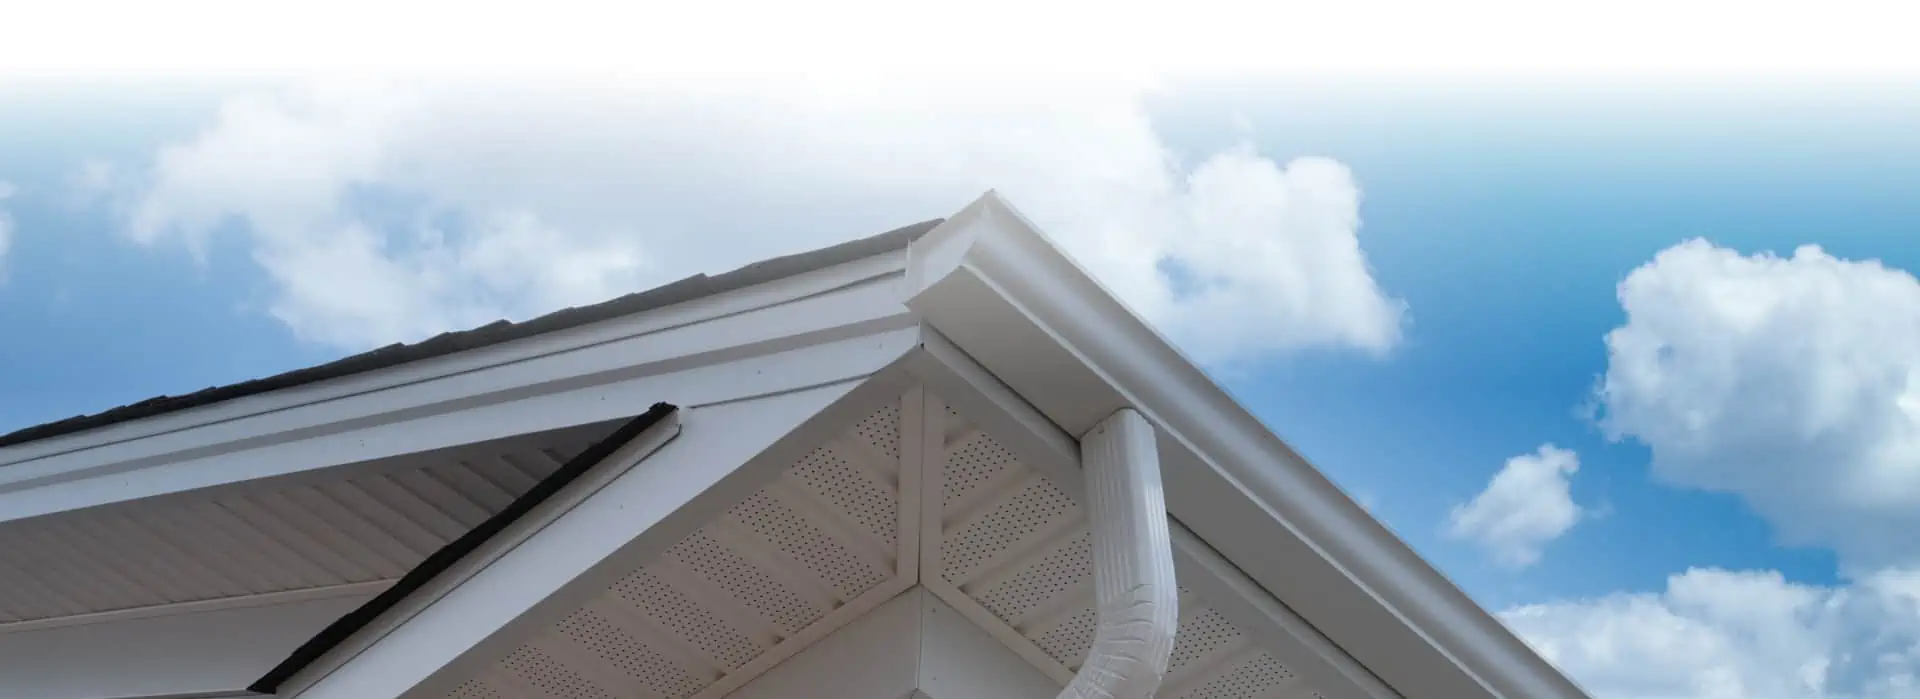 The roof of a house, featuring gutter financing options, with a blue sky in the background.